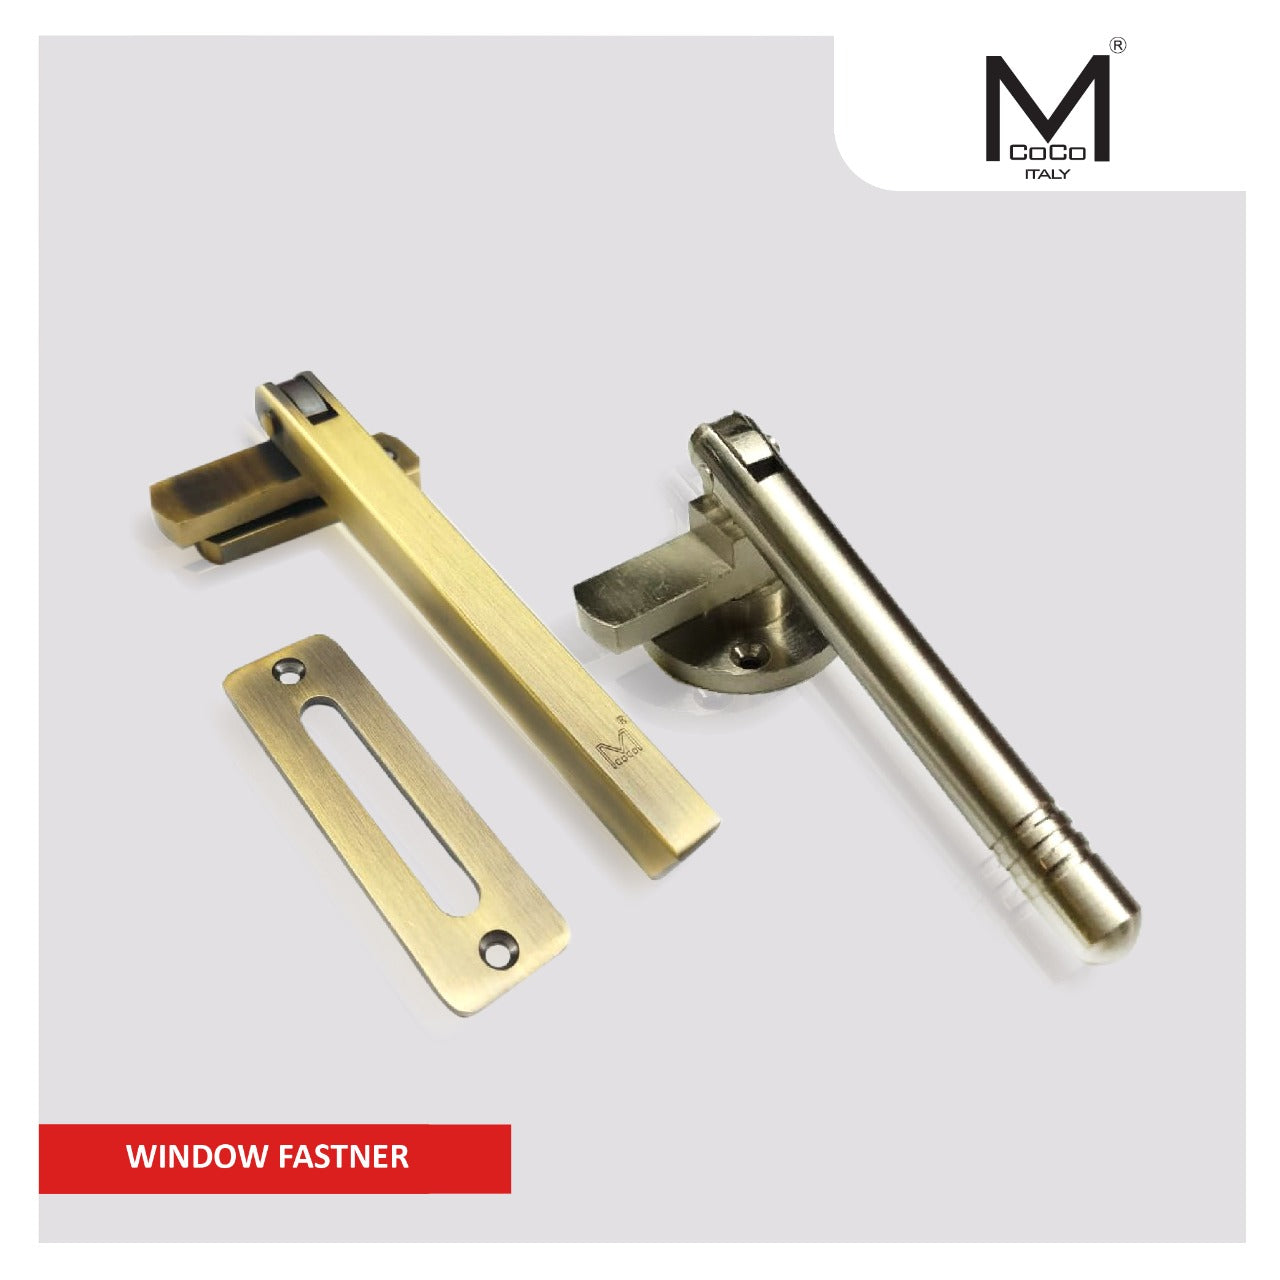 Mcoco Window Fastener - Premium Window Locks for Added Security and Style